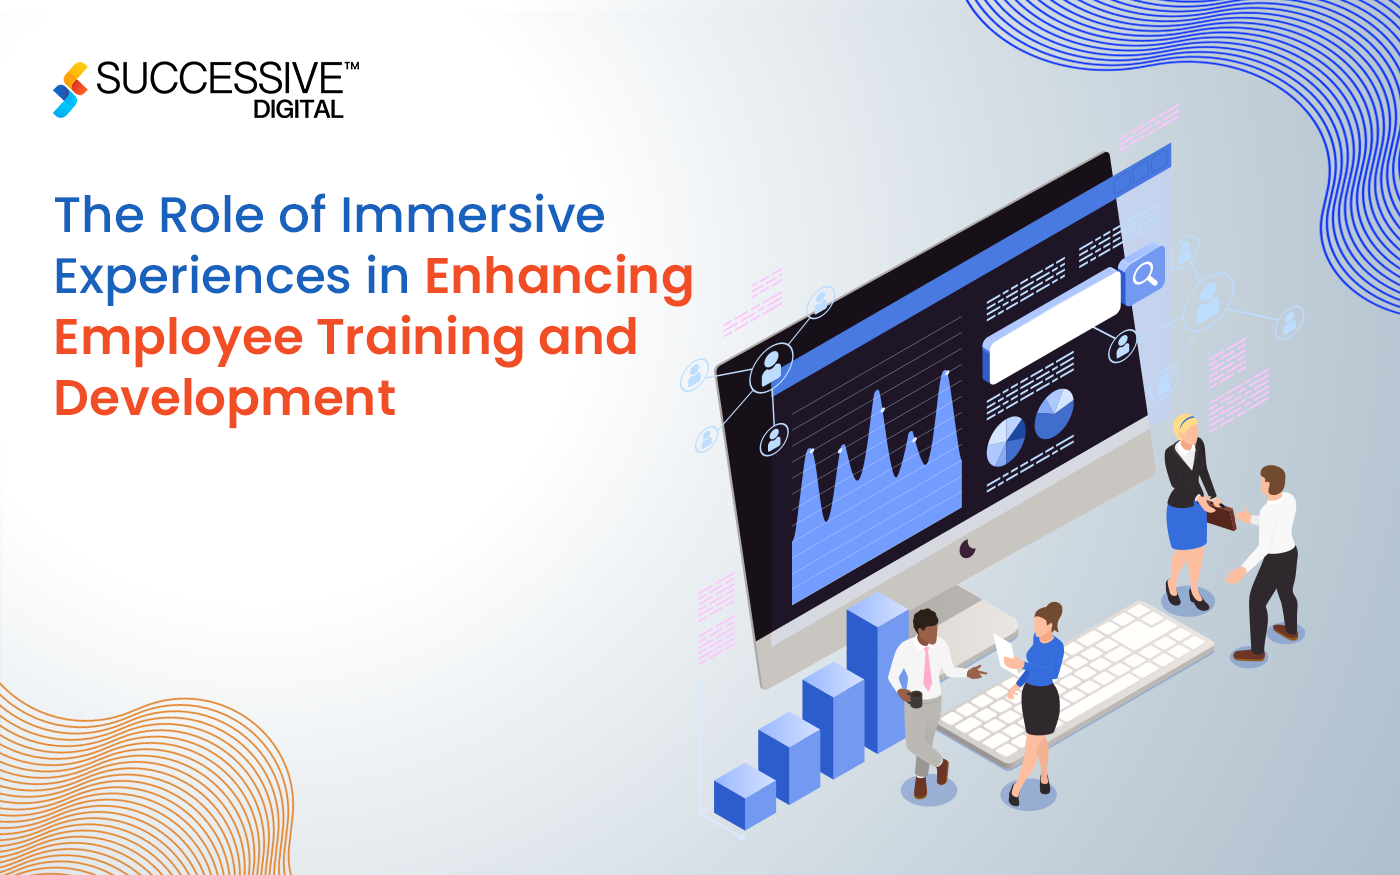 The Role of Immersive Experiences in Enhancing Employee Training and Development